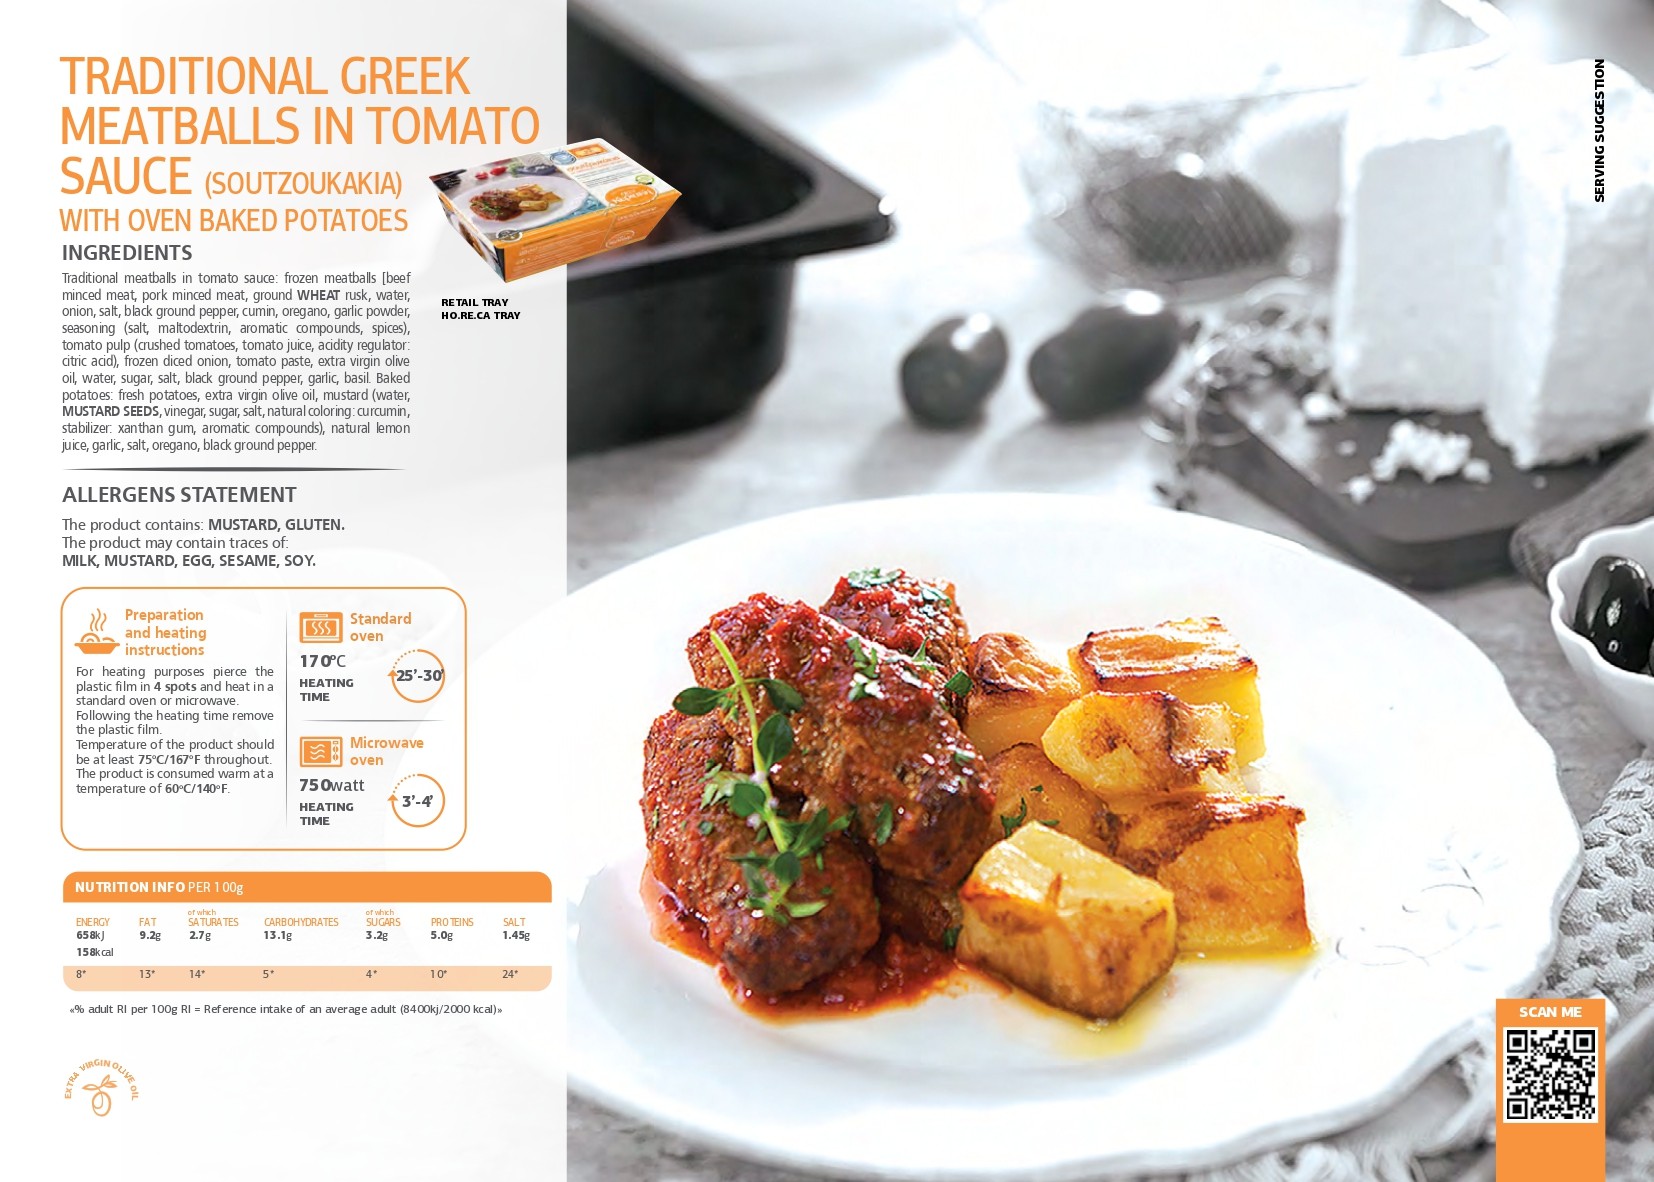 SK - Traditional greek meatballs in tomato sauce (soutzoukakia) with oven baked potatoes pdf image